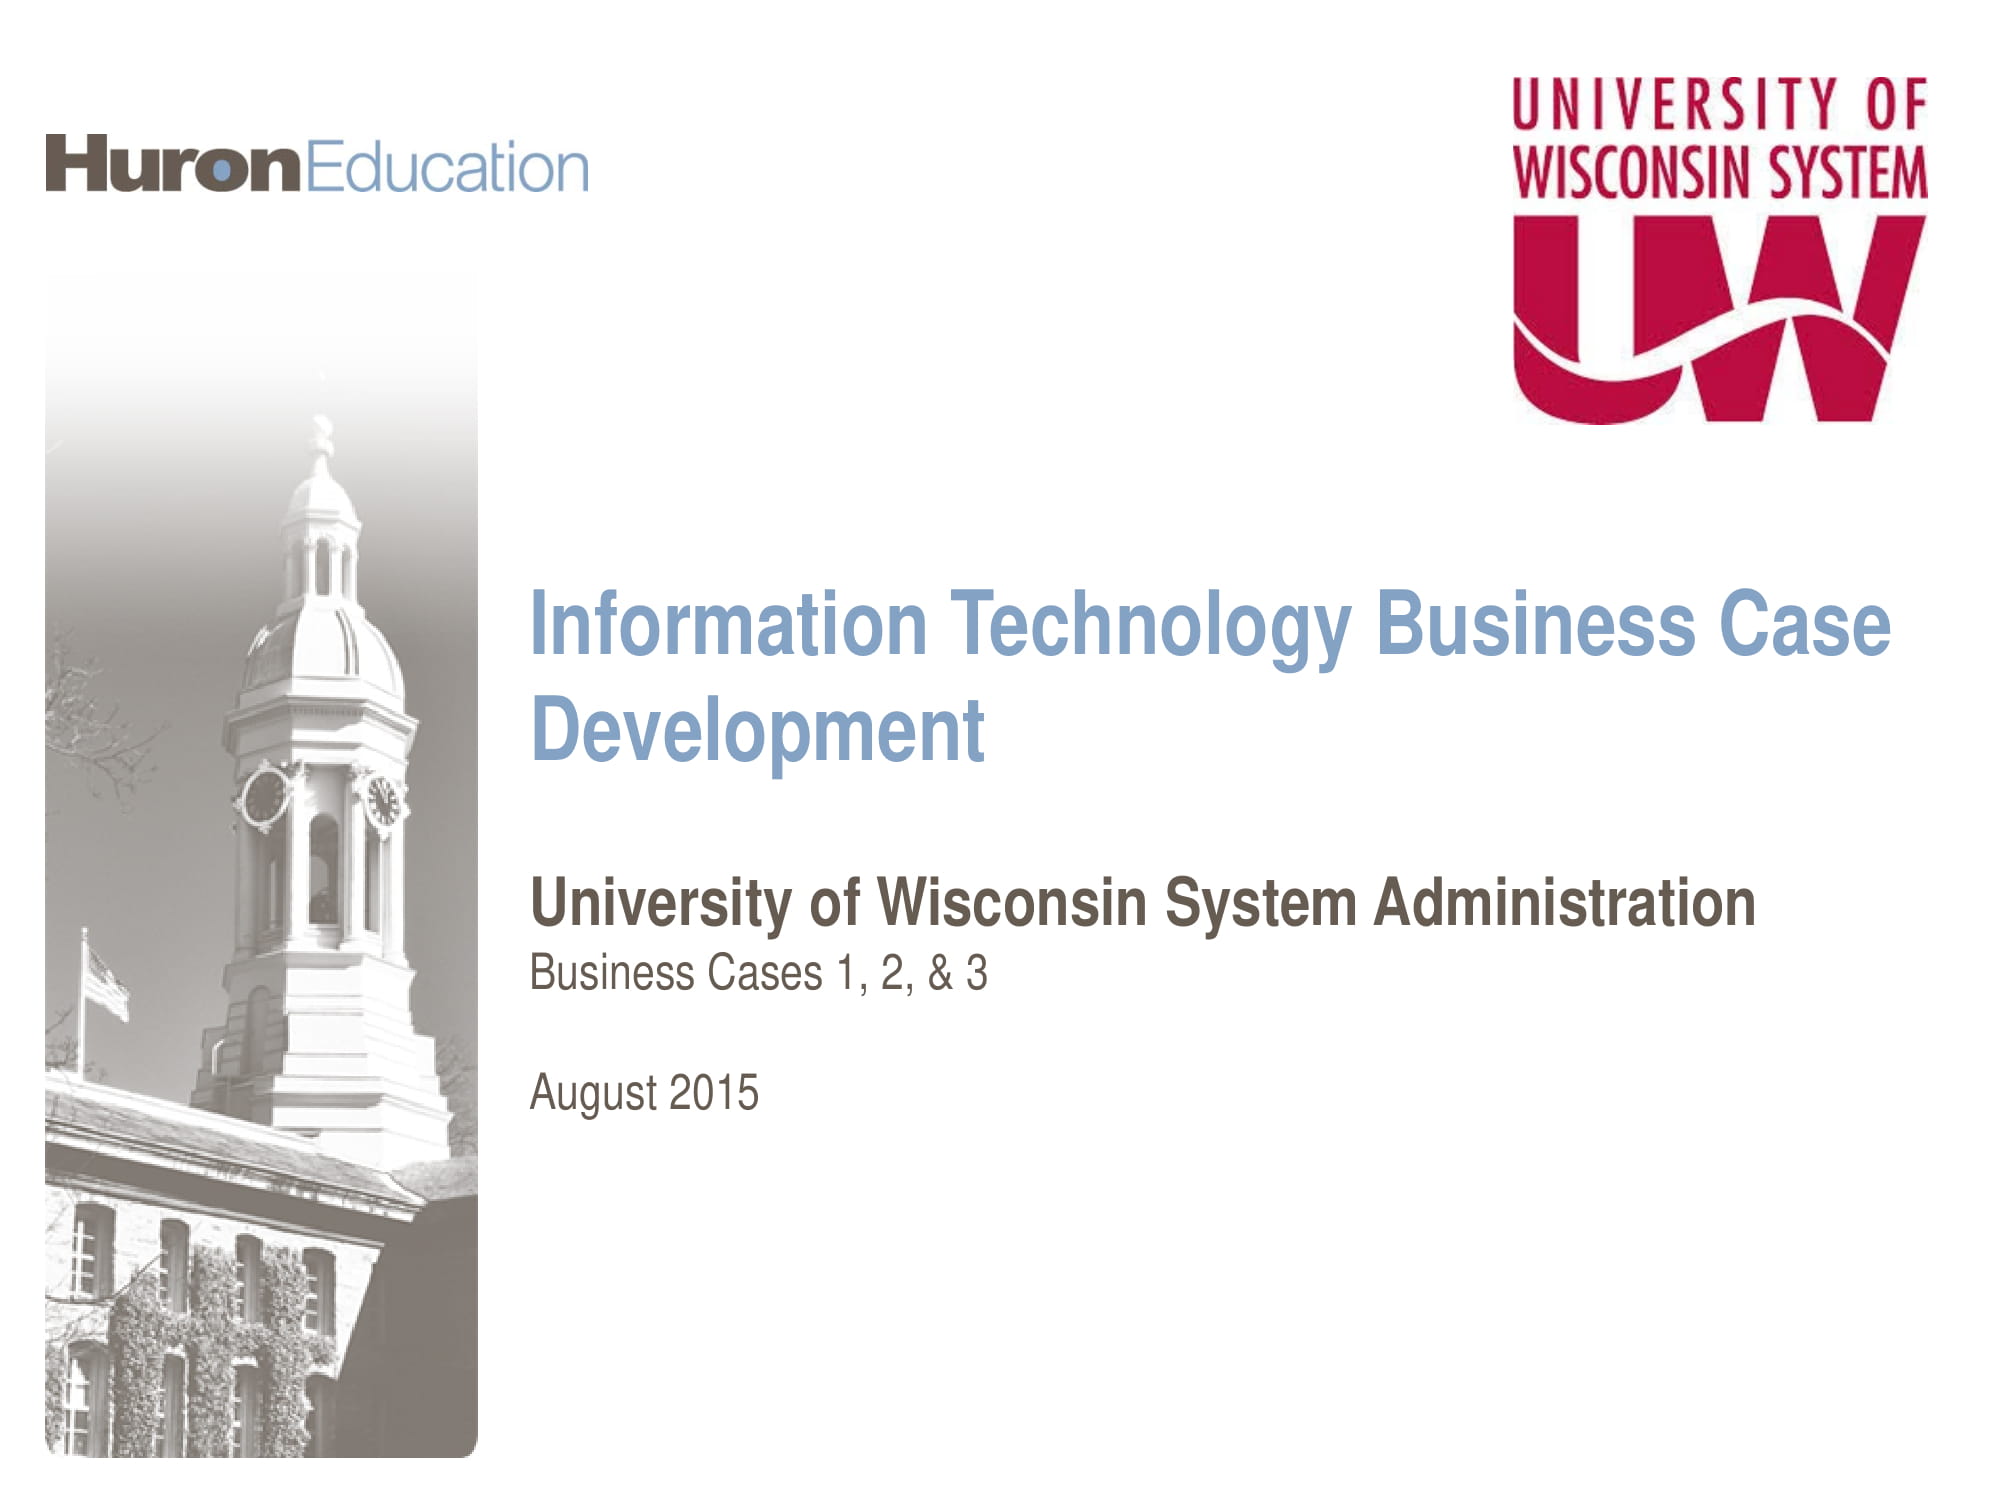 information technology business case development and management report example 01